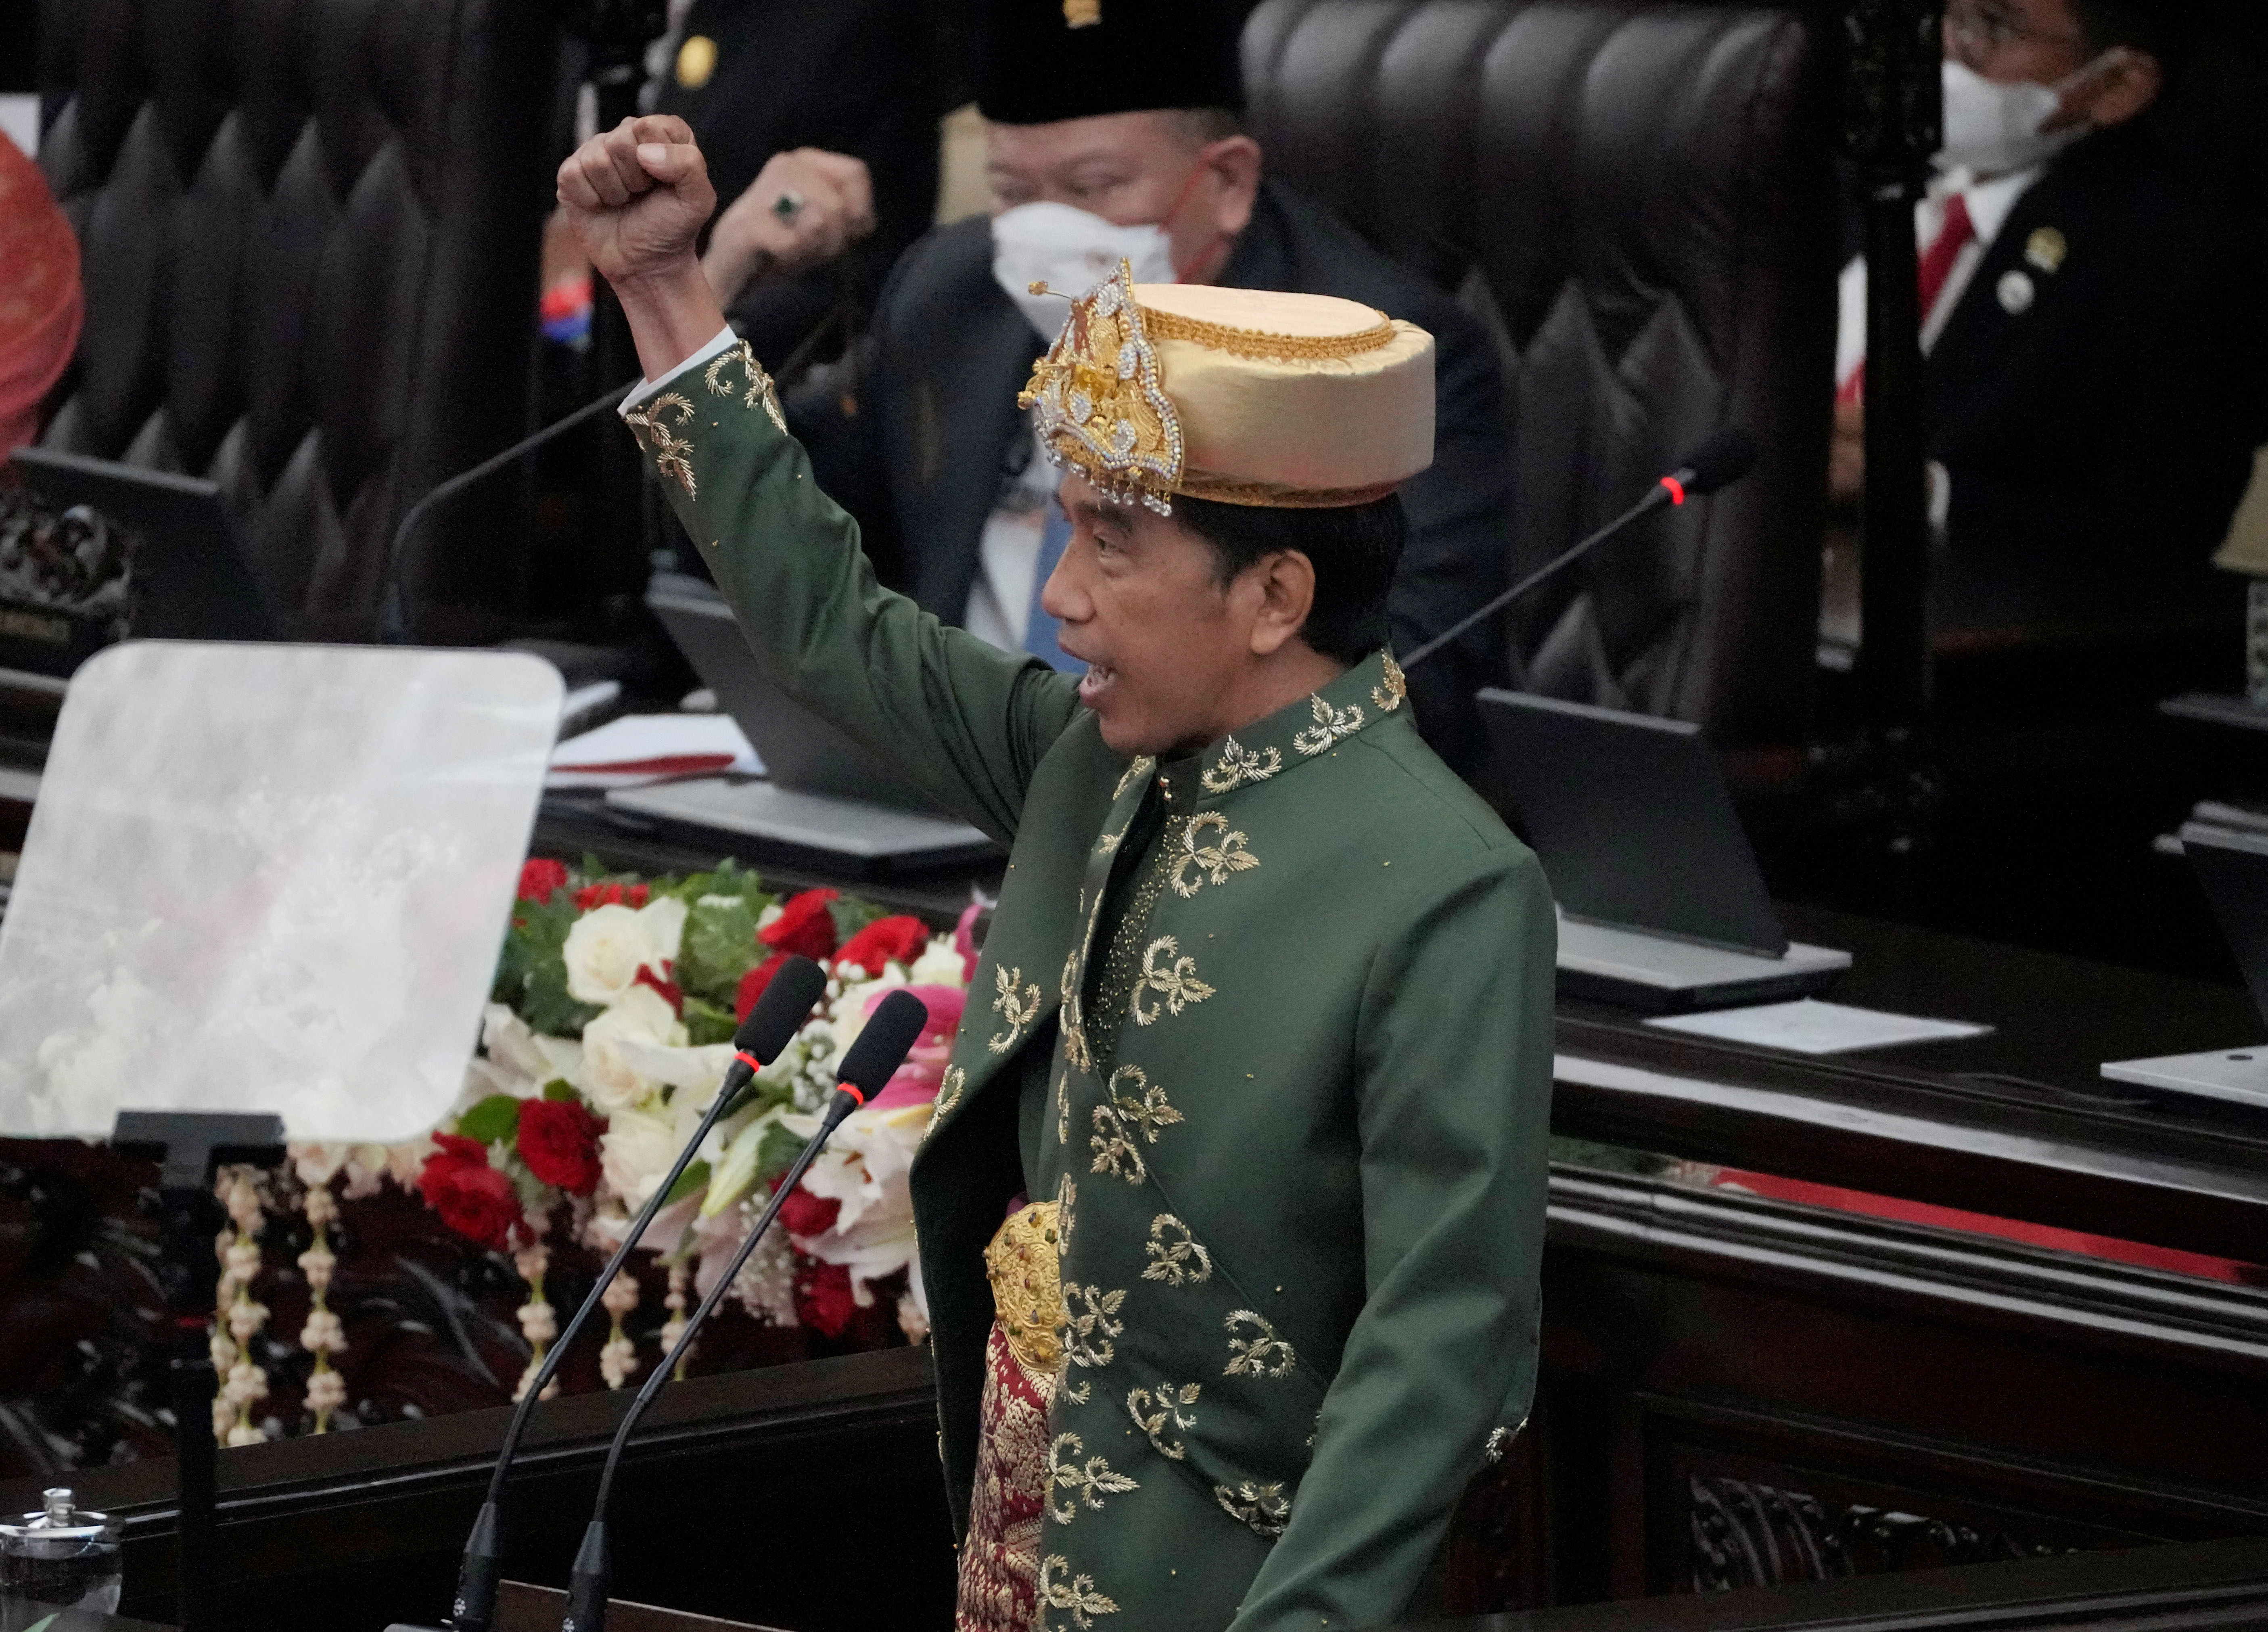 State of the Nation Address ahead of Indonesia's Independence Day